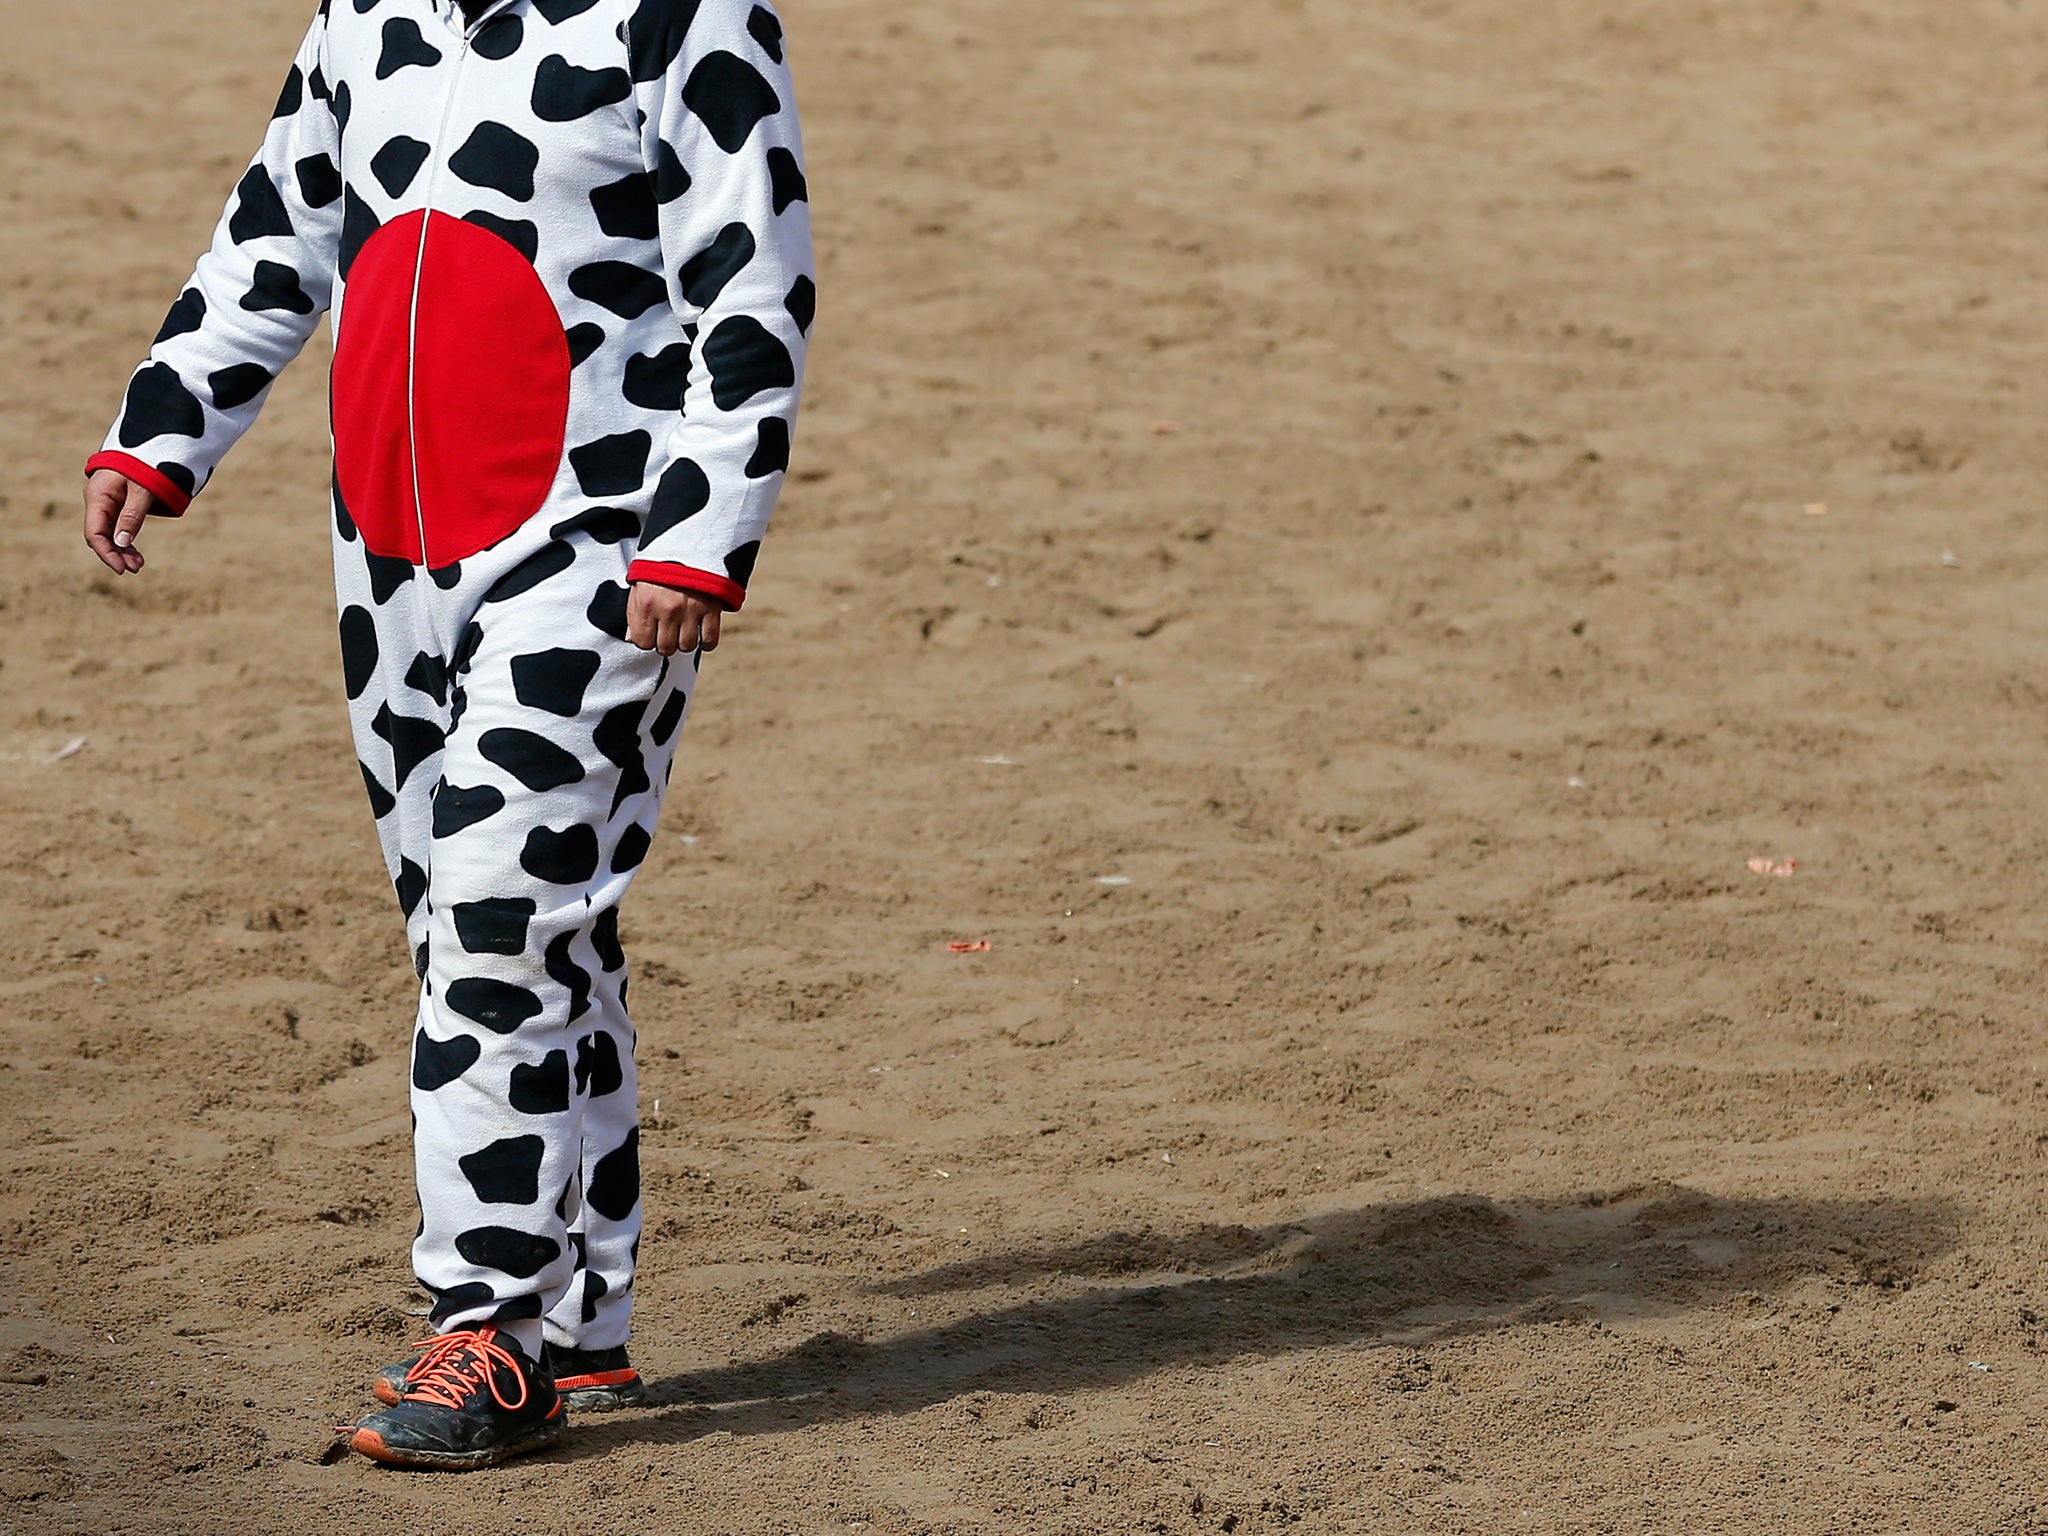 The woman was distinctively dressed in a cow onesie and accompanied by two men